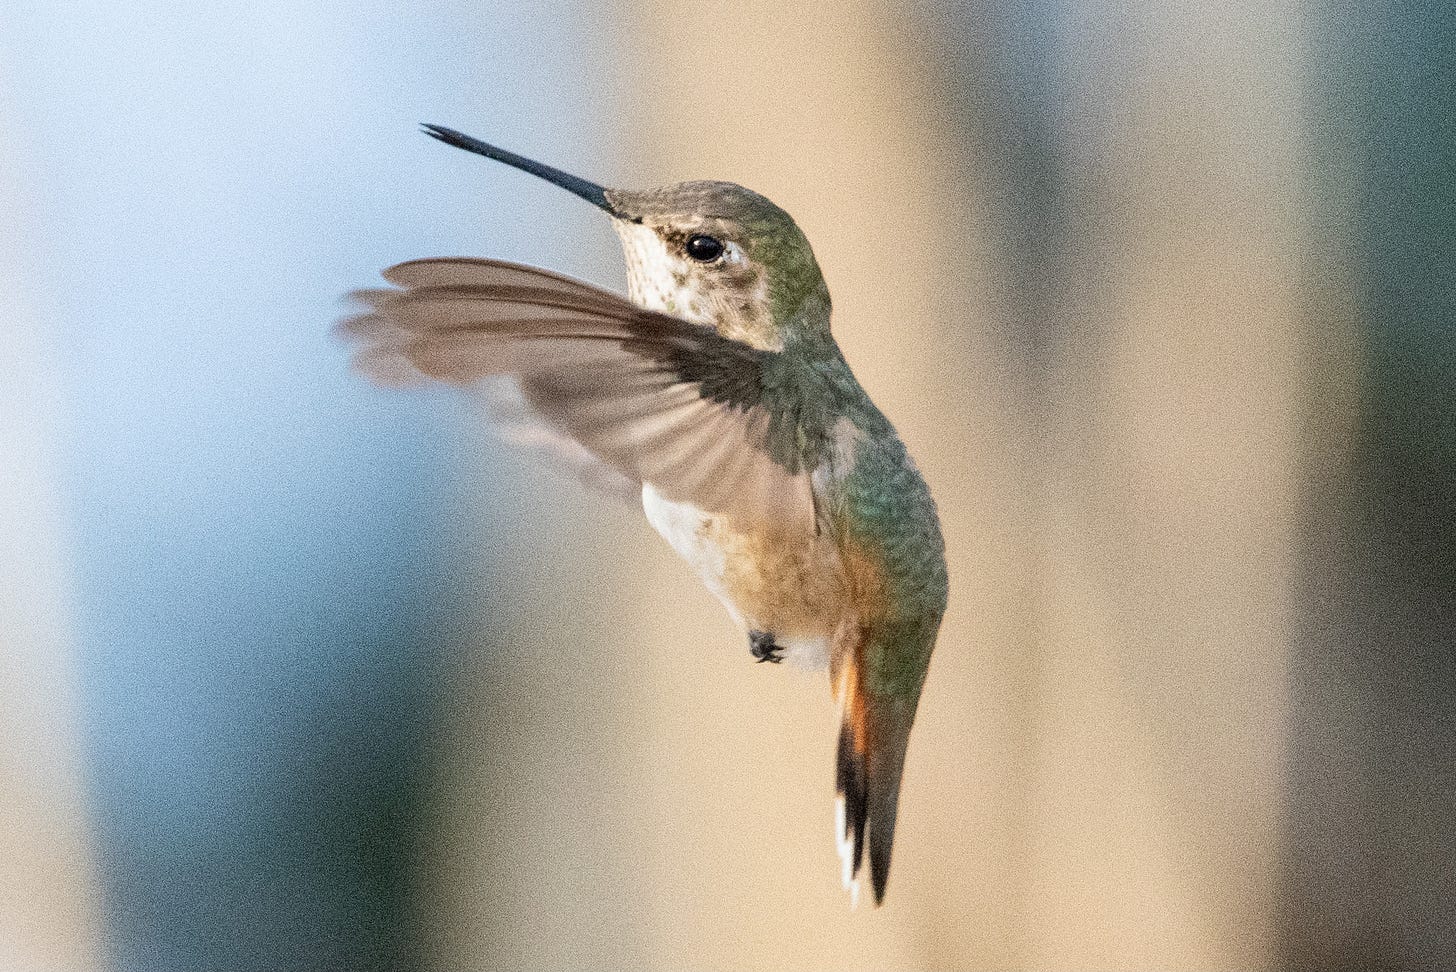 A hummingbird in flight, holding itself almost vertical in the air, its wings folded in front of it